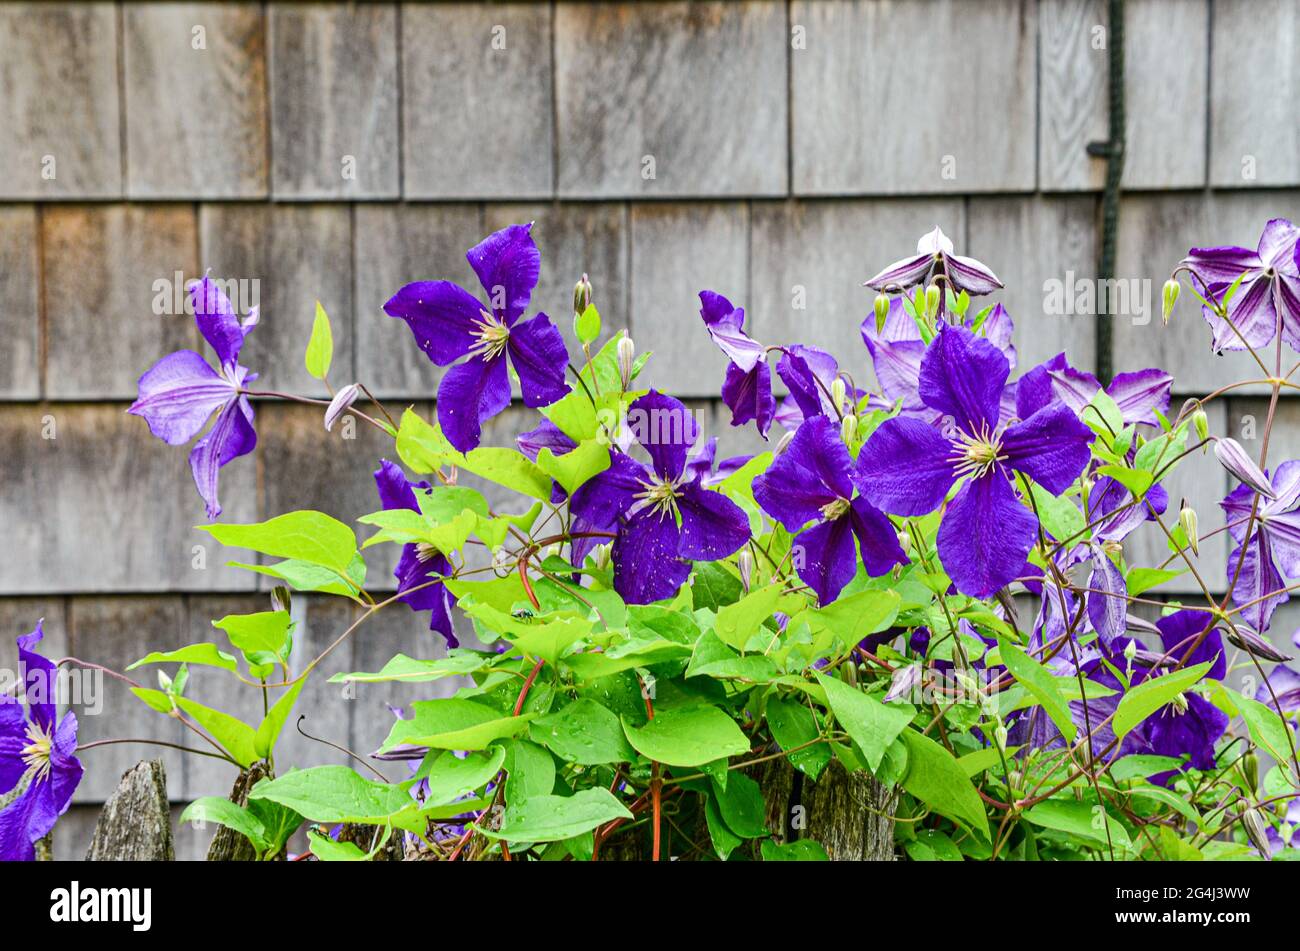 Purple clematis flowers and lime-green foliage on the backdrop of grey weathered wood shingles. Copy space. Friendship, Maine, USA. Stock Photo